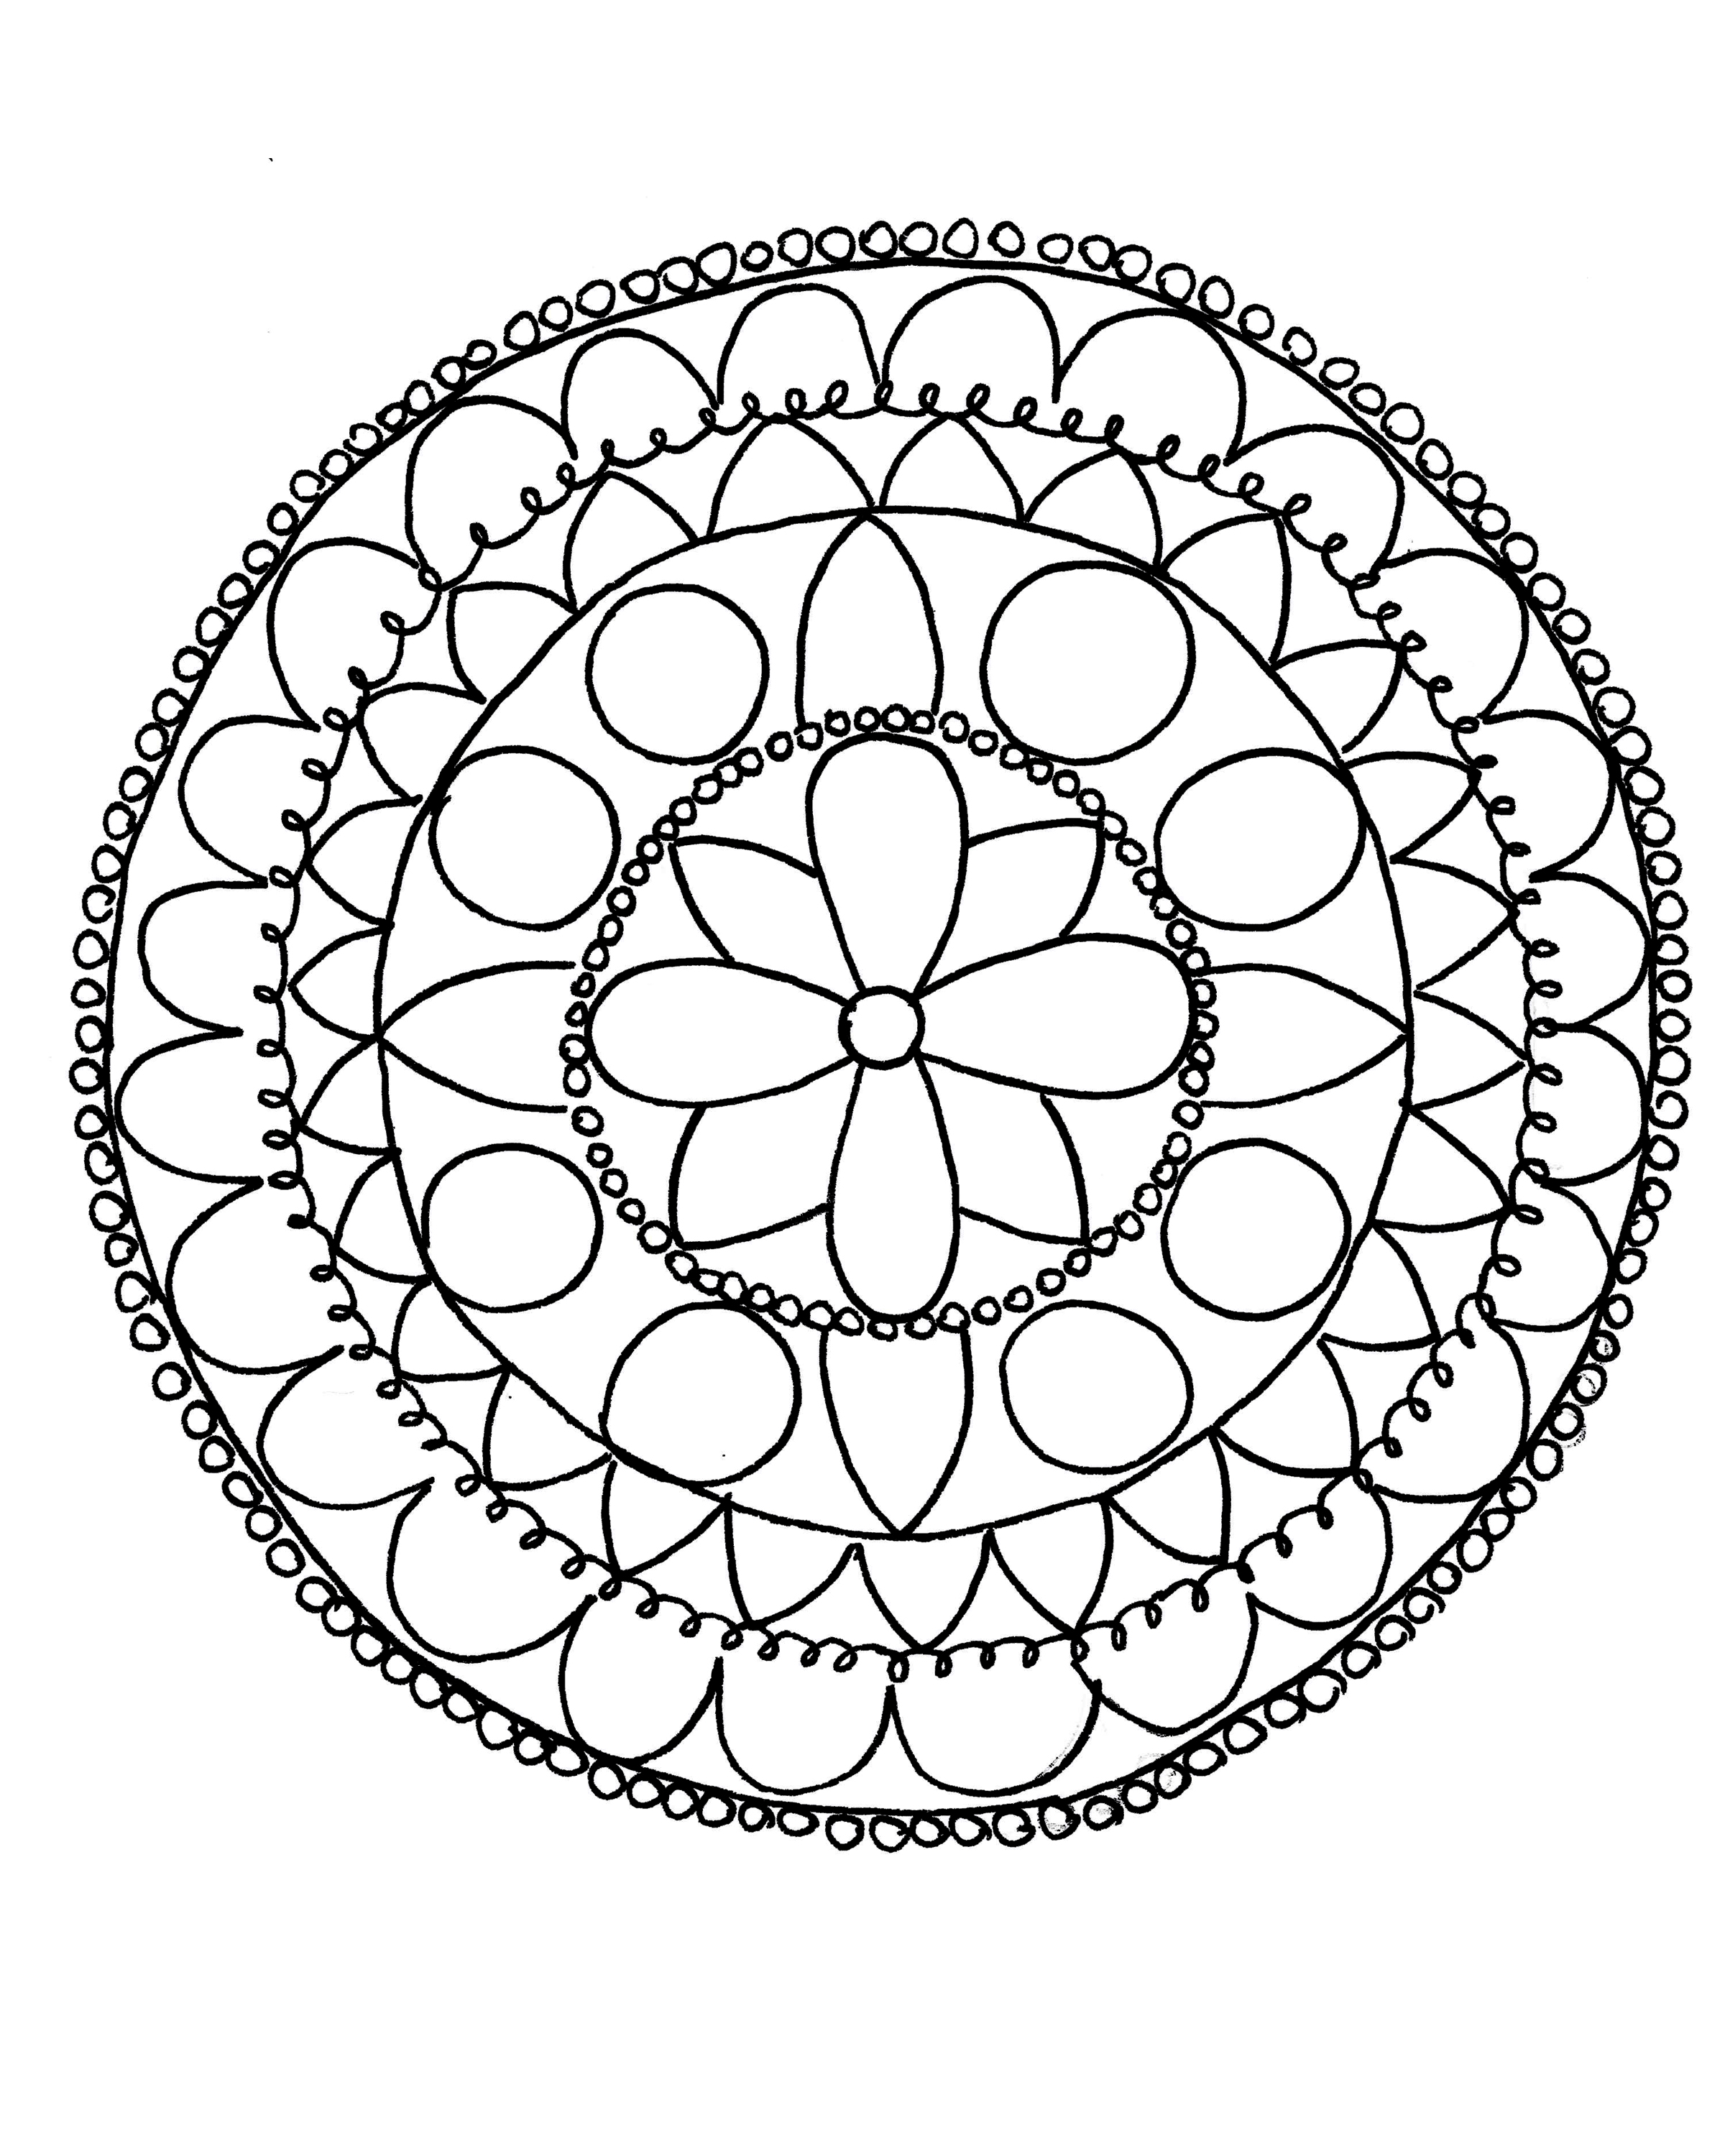 stress-relief-coloring-pages-printable-at-getdrawings-free-download